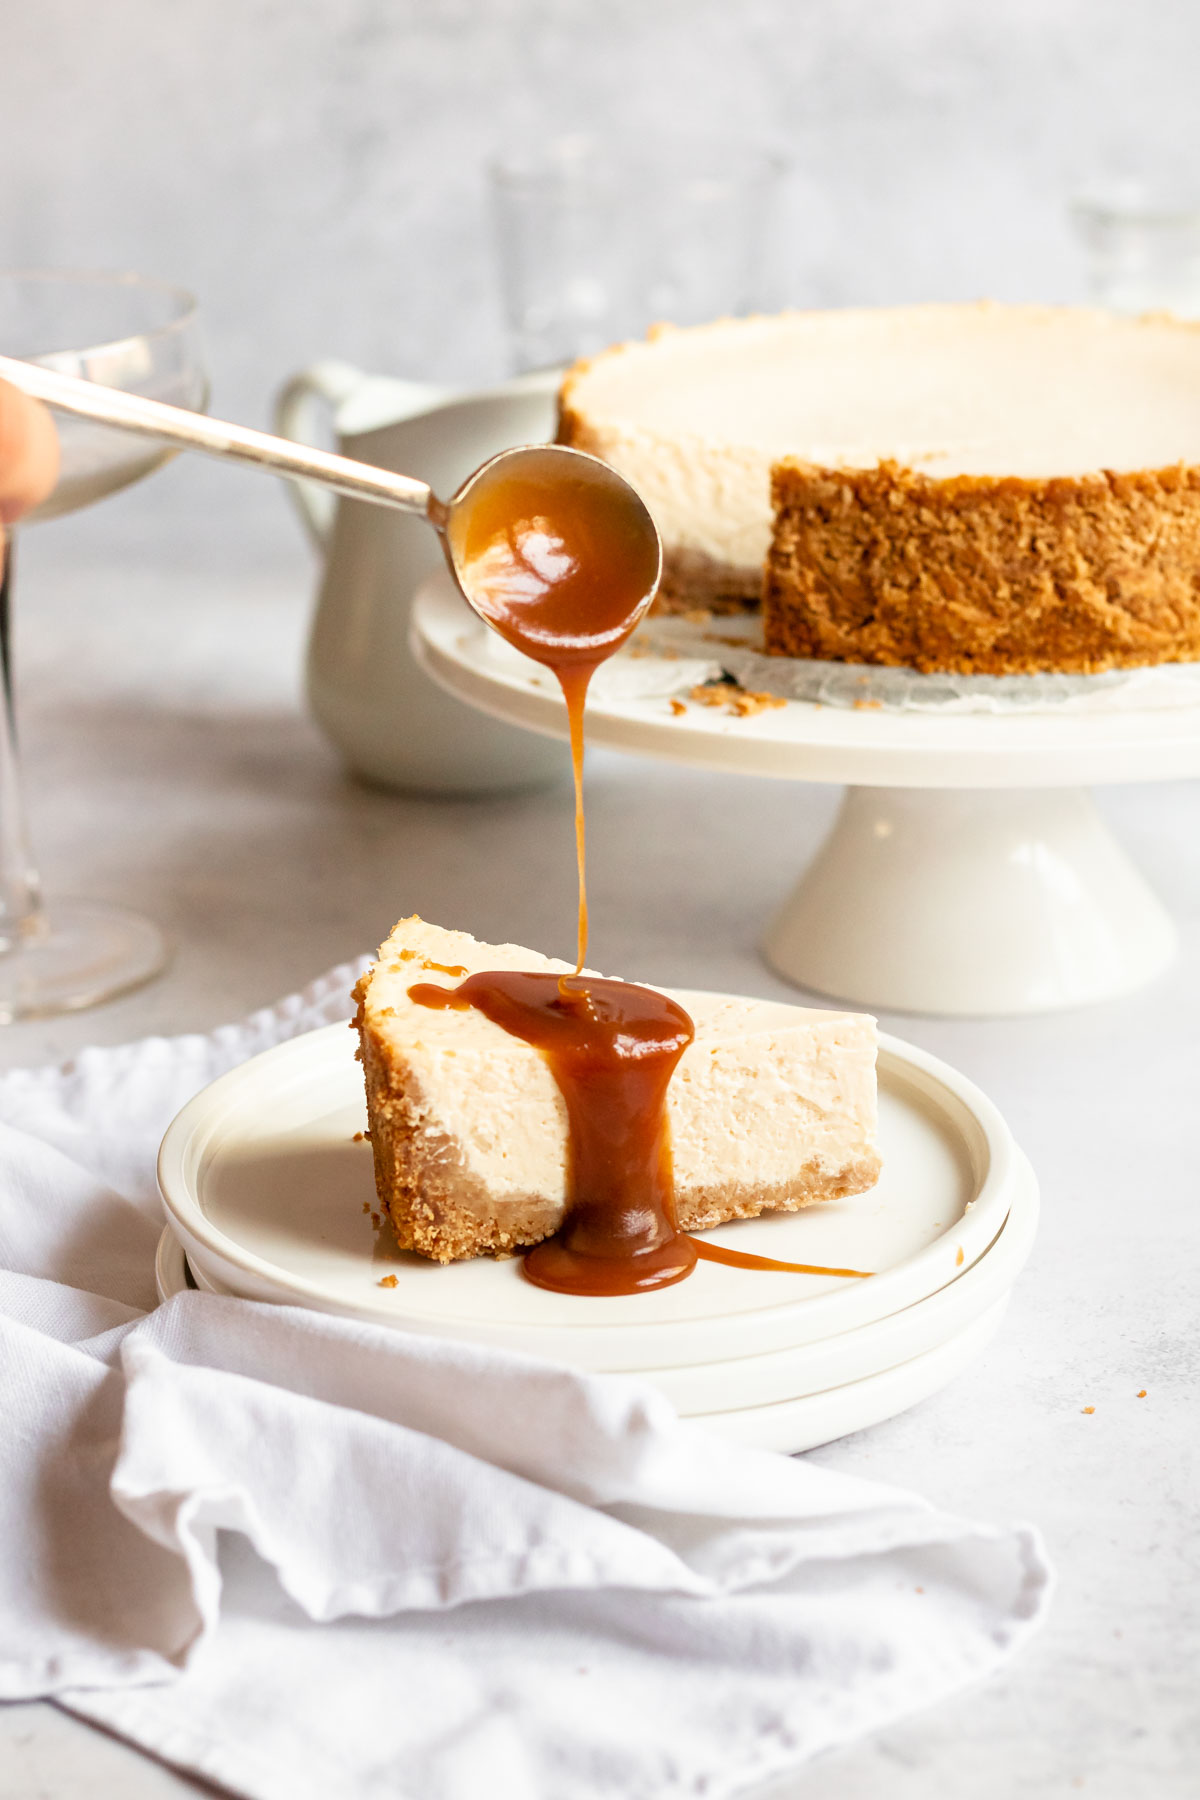 Caramel drizzled over a slice of cheesecake.